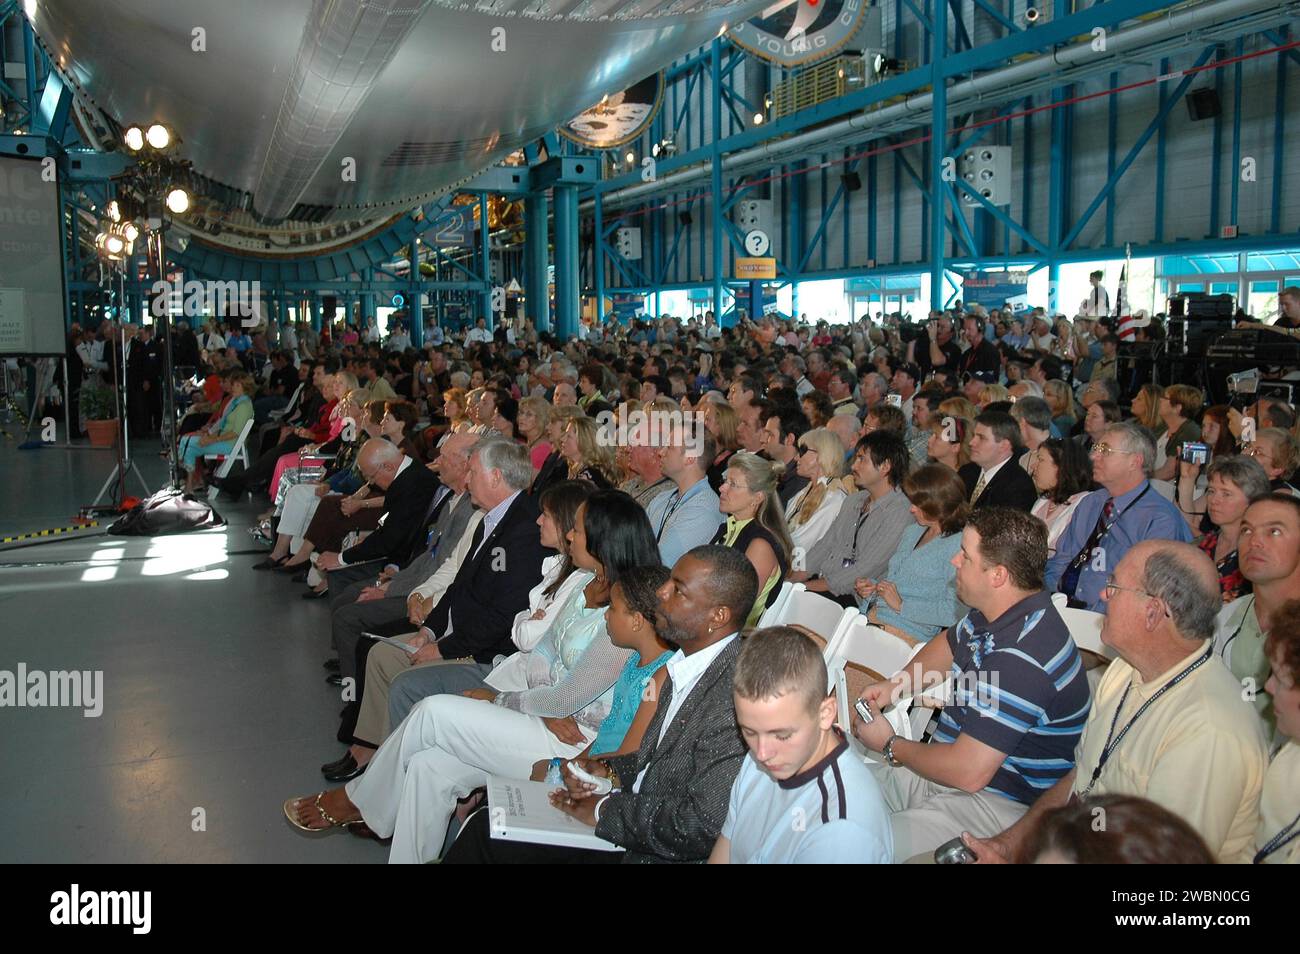 KENNEDY SPACE CENTER, FLA. - A crowd of 1,000 gather in Kennedy Space Center Visitor Complex’s Apollo Saturn V Center for the Astronaut Hall of Fame Induction Ceremony. The event was attended by KSC Director Jim Kennedy and his wife, Bernadette, many previous inductees and invited guests, as well as the media, to honor the newest inductees Bruce McCandless, Joe Allen and Gordon Fullerton. Master of Ceremonies was LeVar Burton, who starred in the television series “Star Trek The Next Generation.” Recognized for their individual flight accomplishments and contributions to the success and future Stock Photo